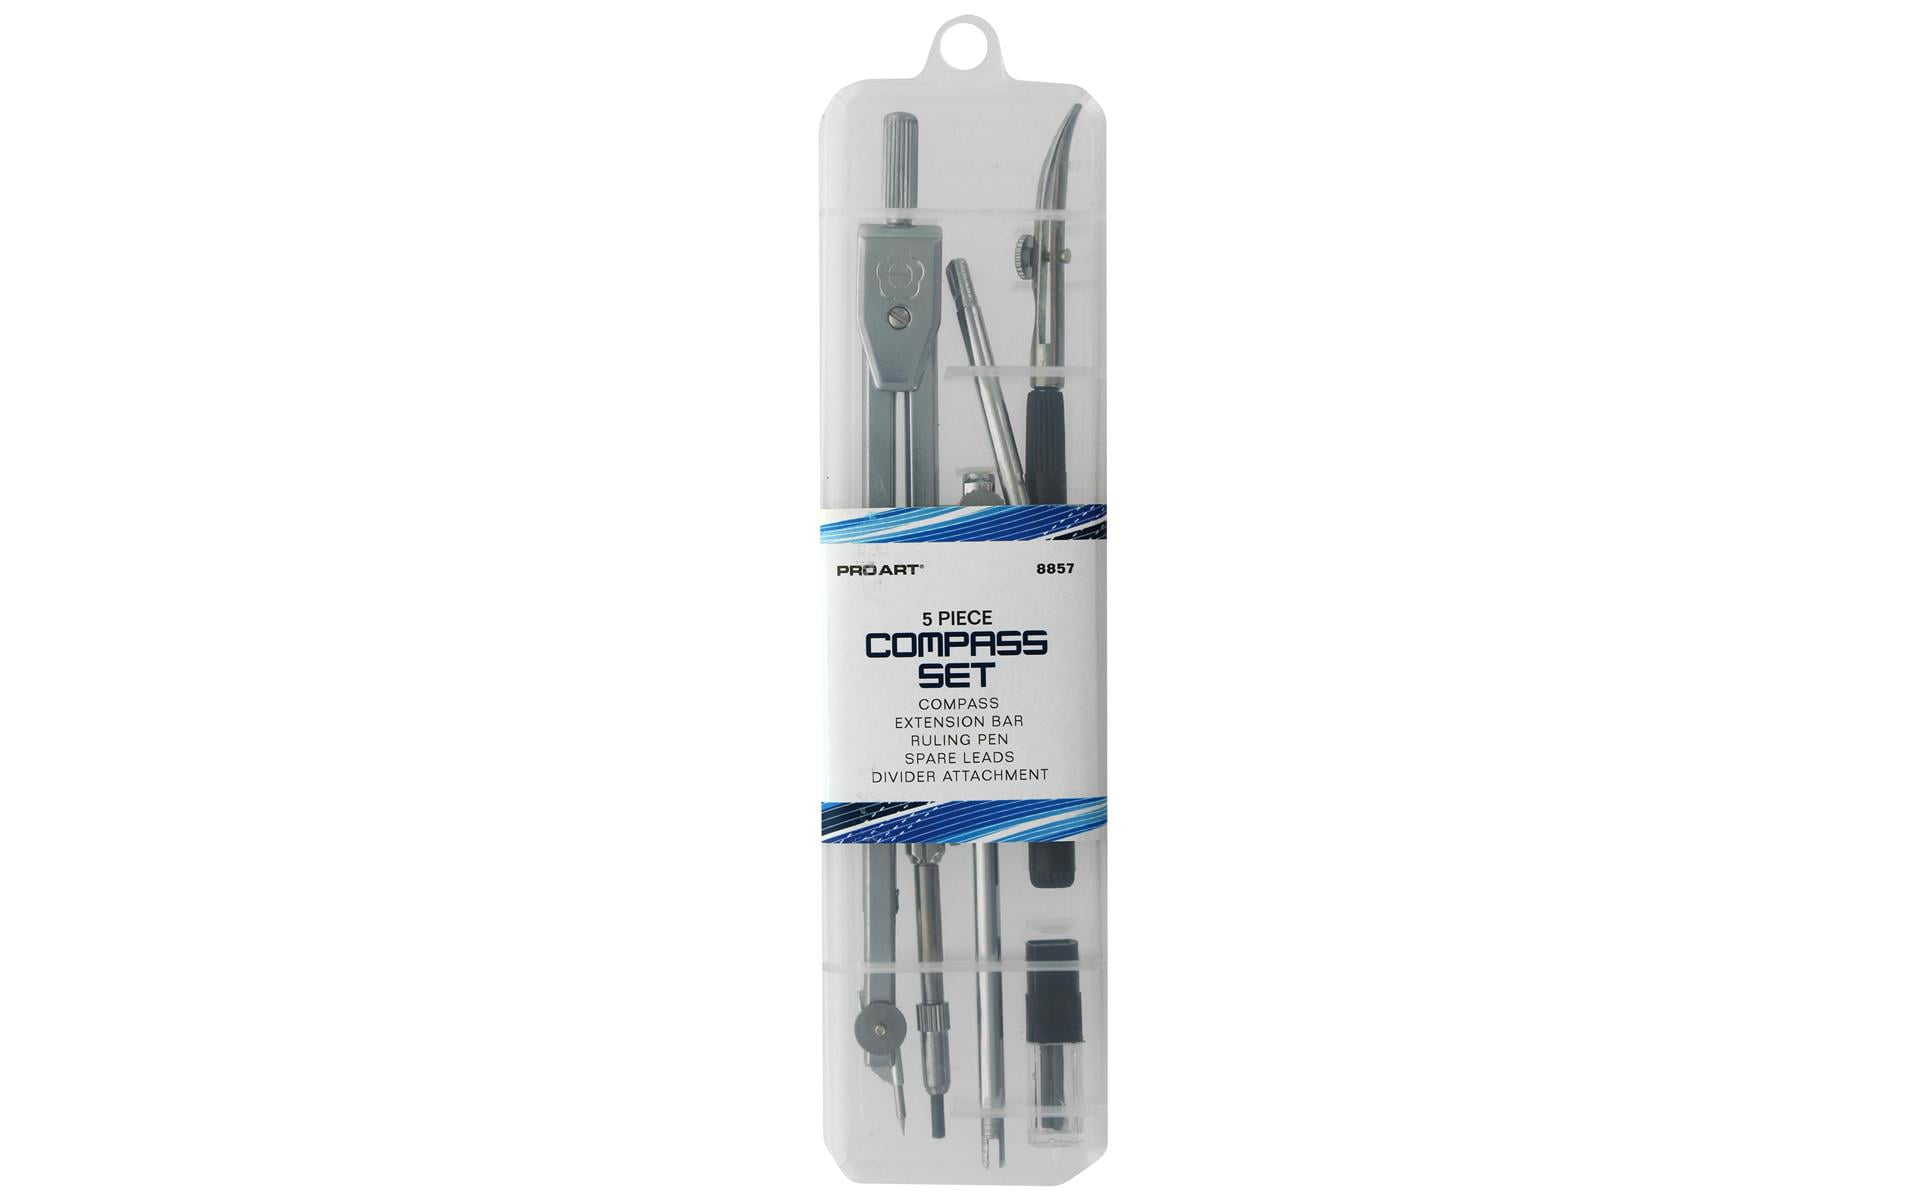 LOC TUB 2 Blue Silver Staedtler 2-Piece Advanced Student Geometrical Compass 